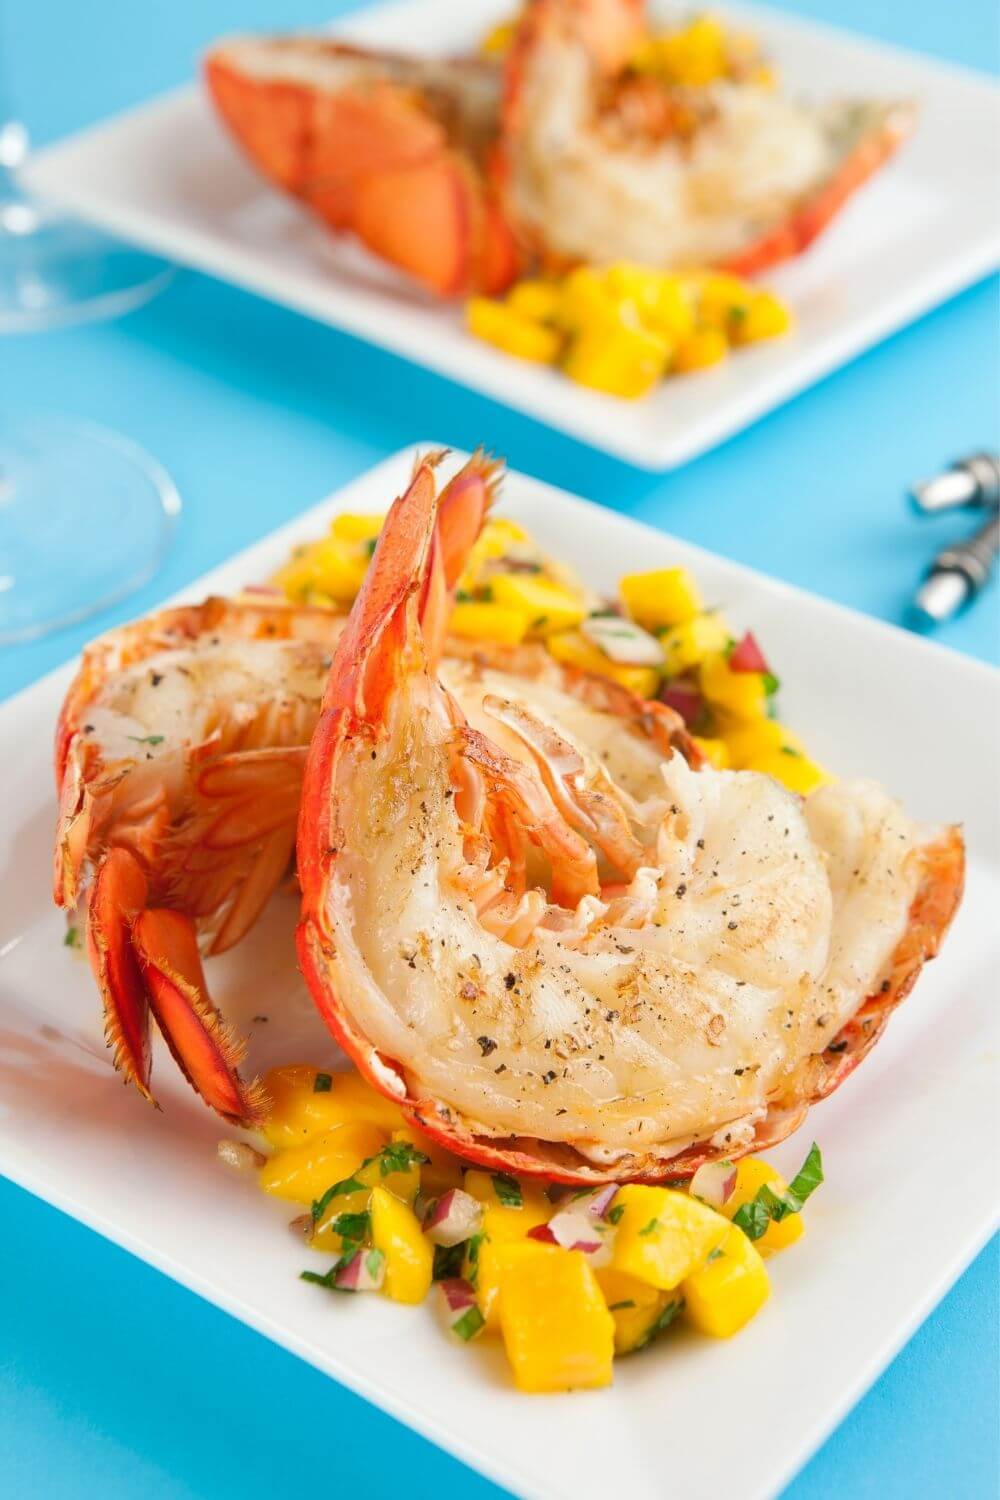 What to Serve with Lobster Tails(19 sides Ideas)